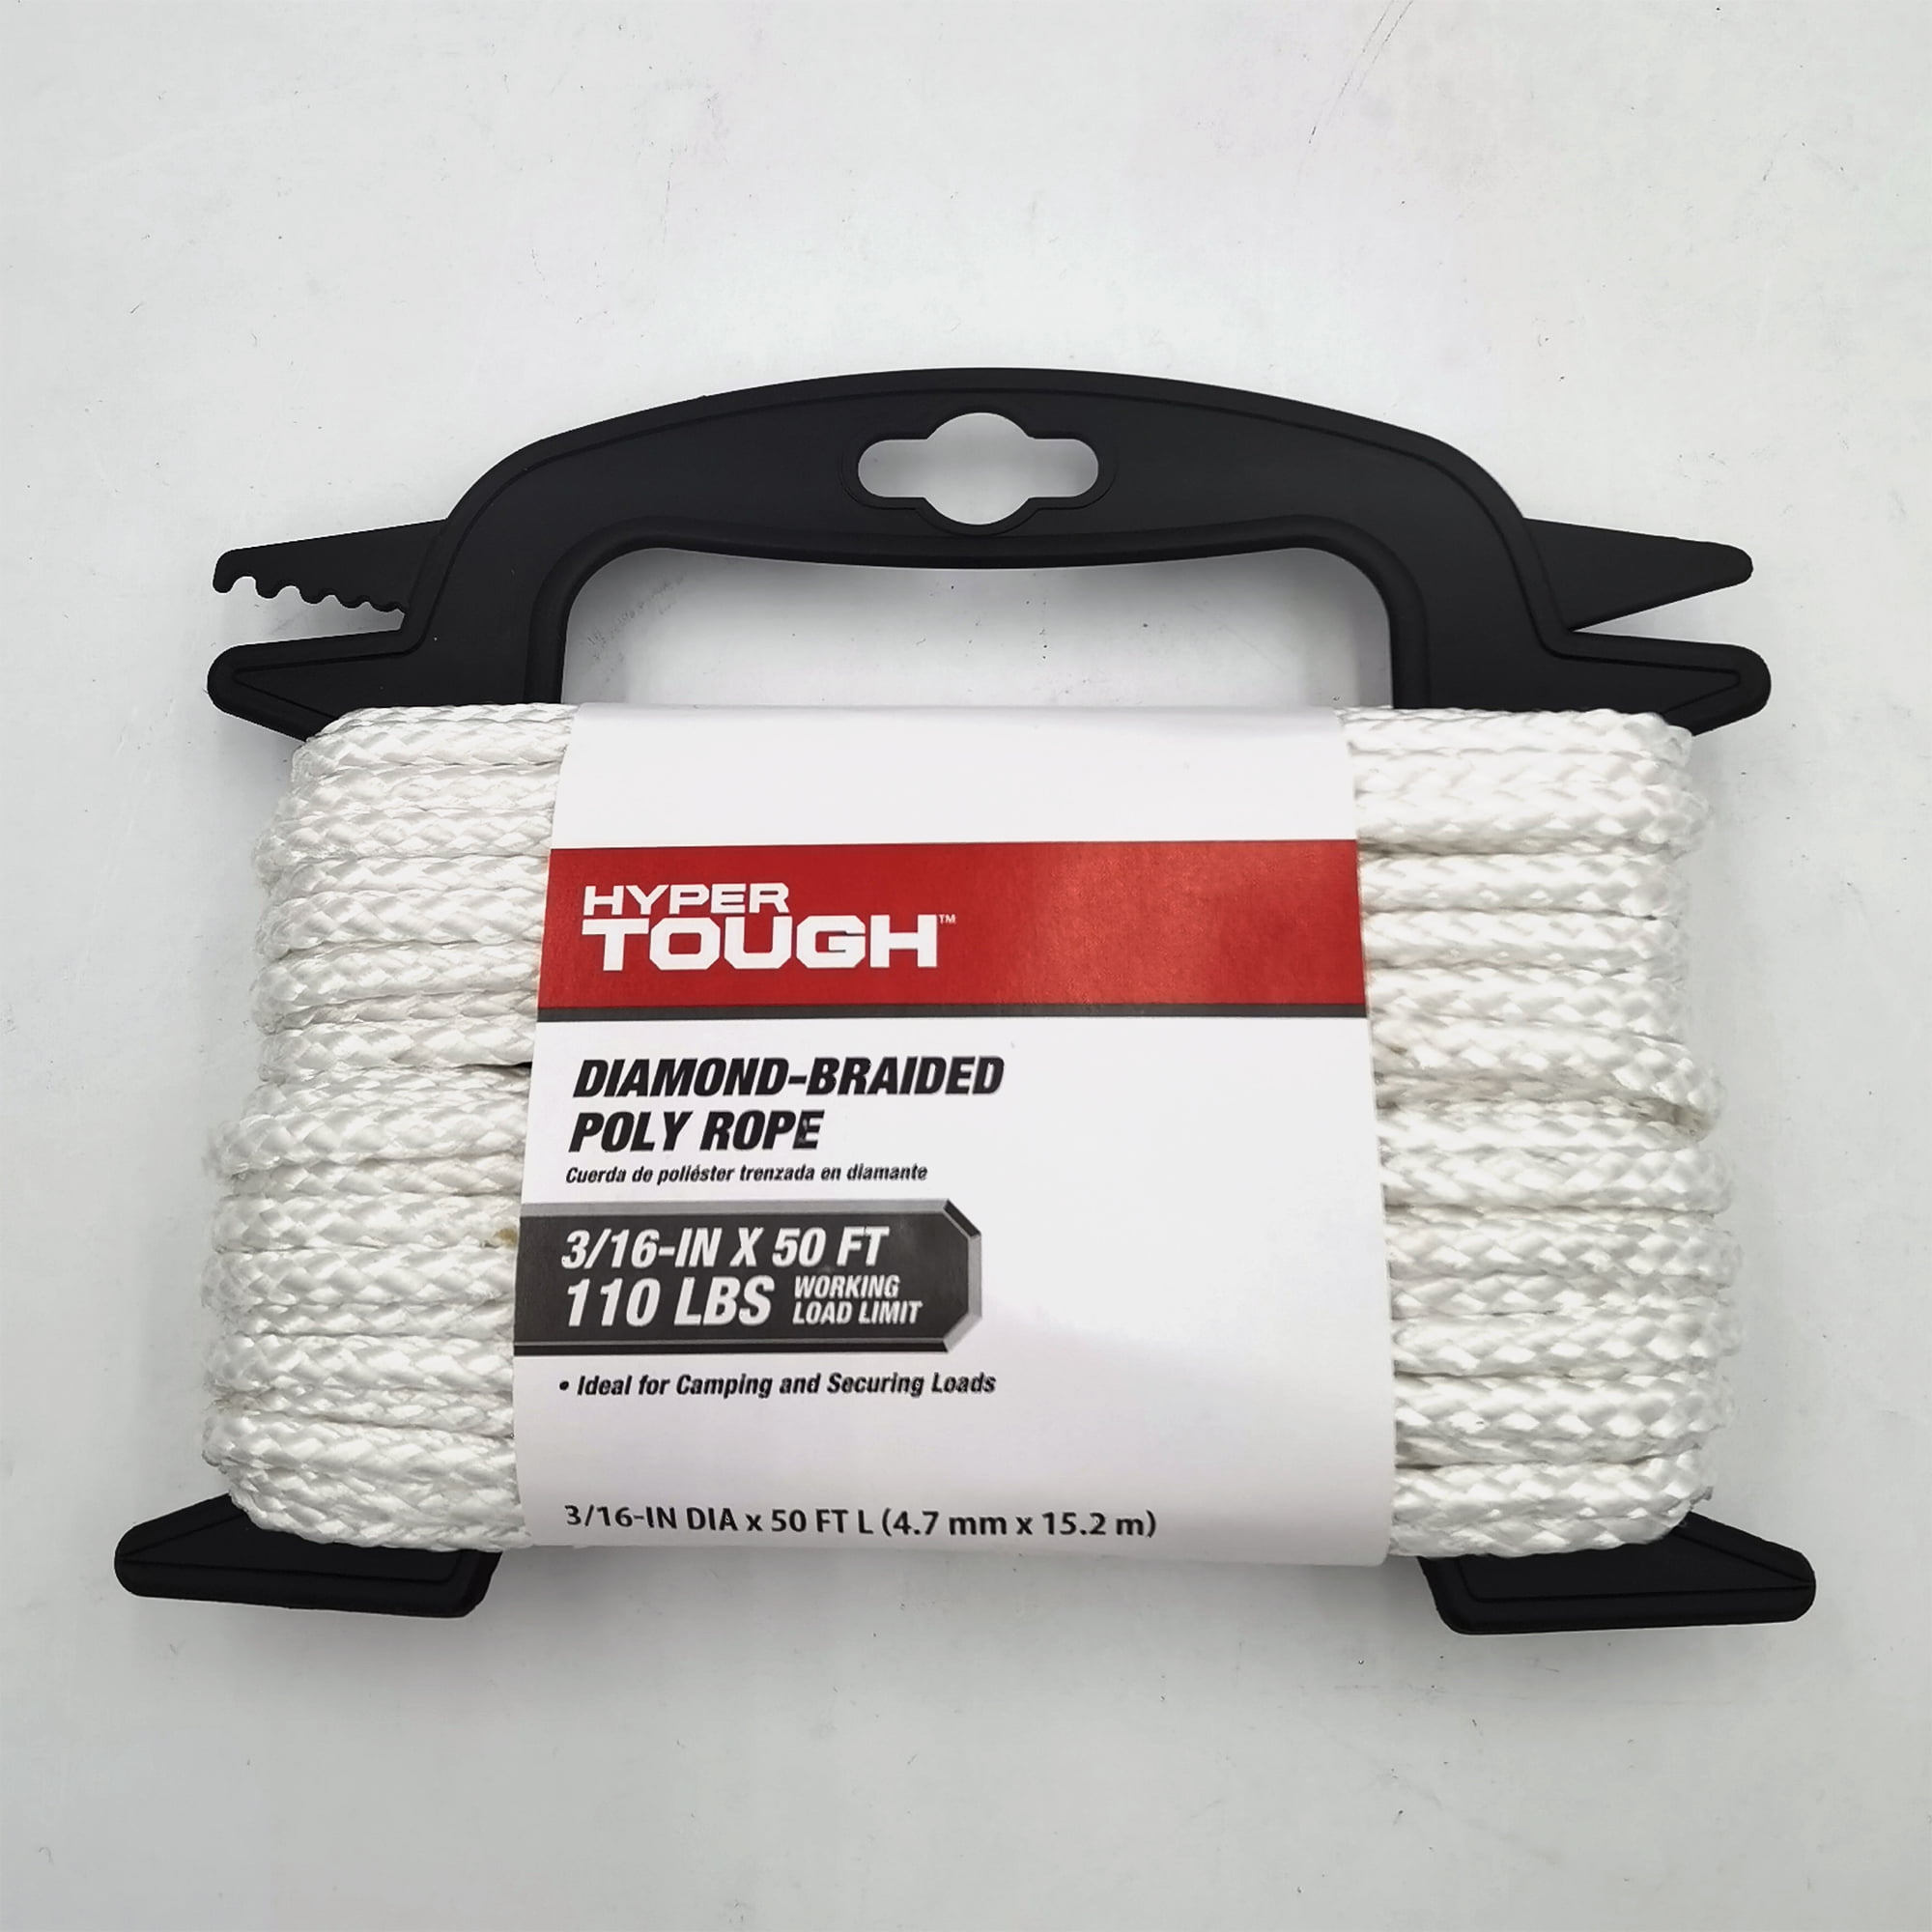 GOLBERG Diamond Braid Nylon Rope All Purpose Use for The Toughest of Environments and Tasks Strong and Durable with Shock Absorption and Stretch 